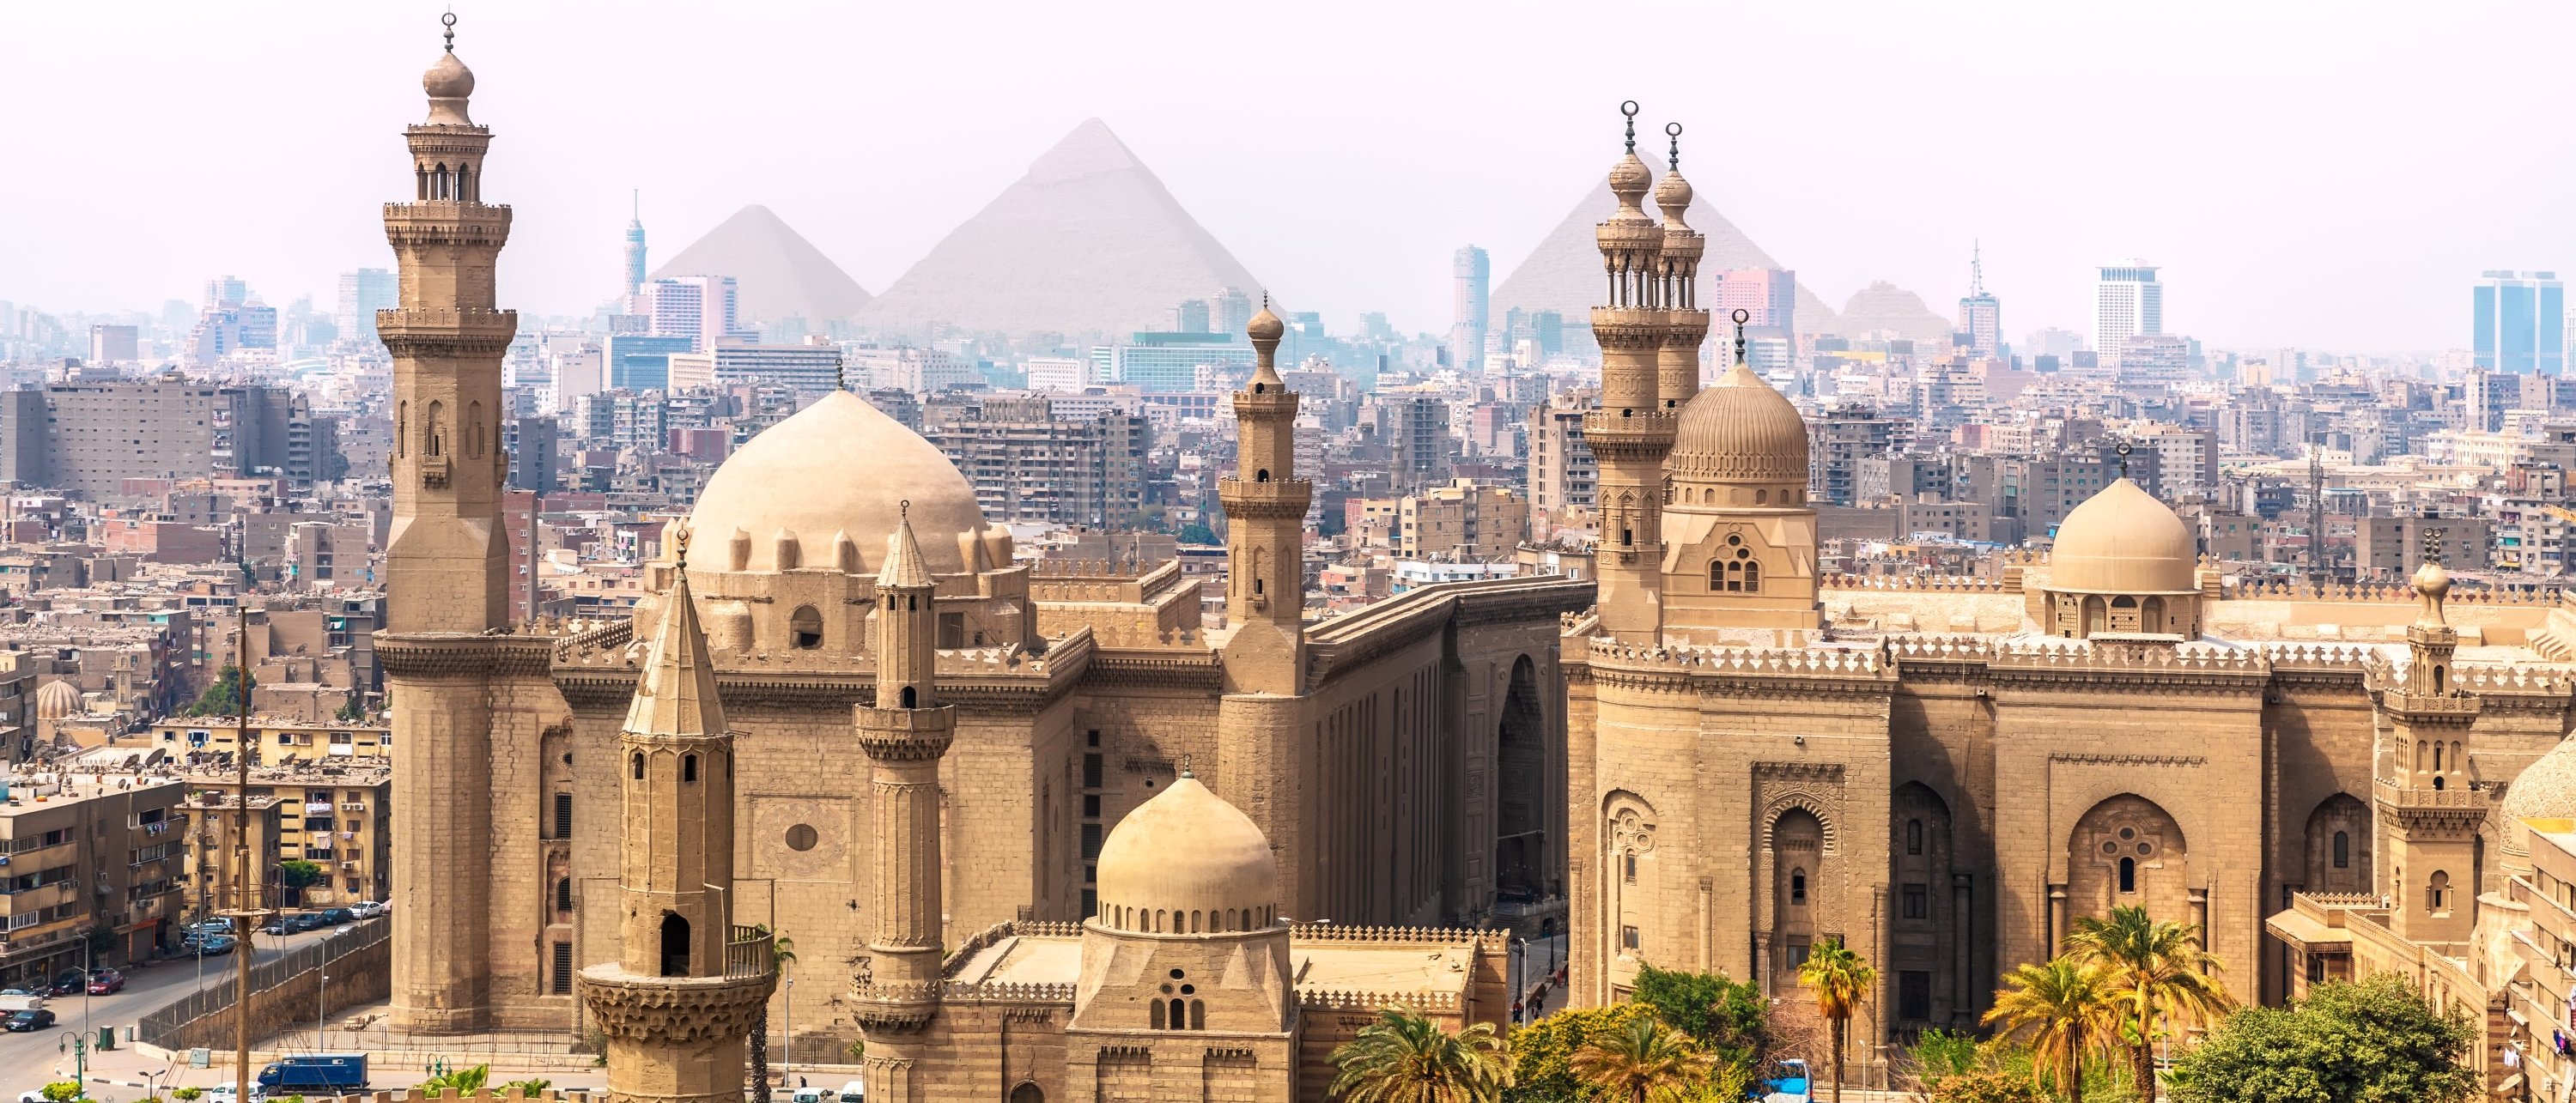 Image of buildings in Cairo with pyramids in the background